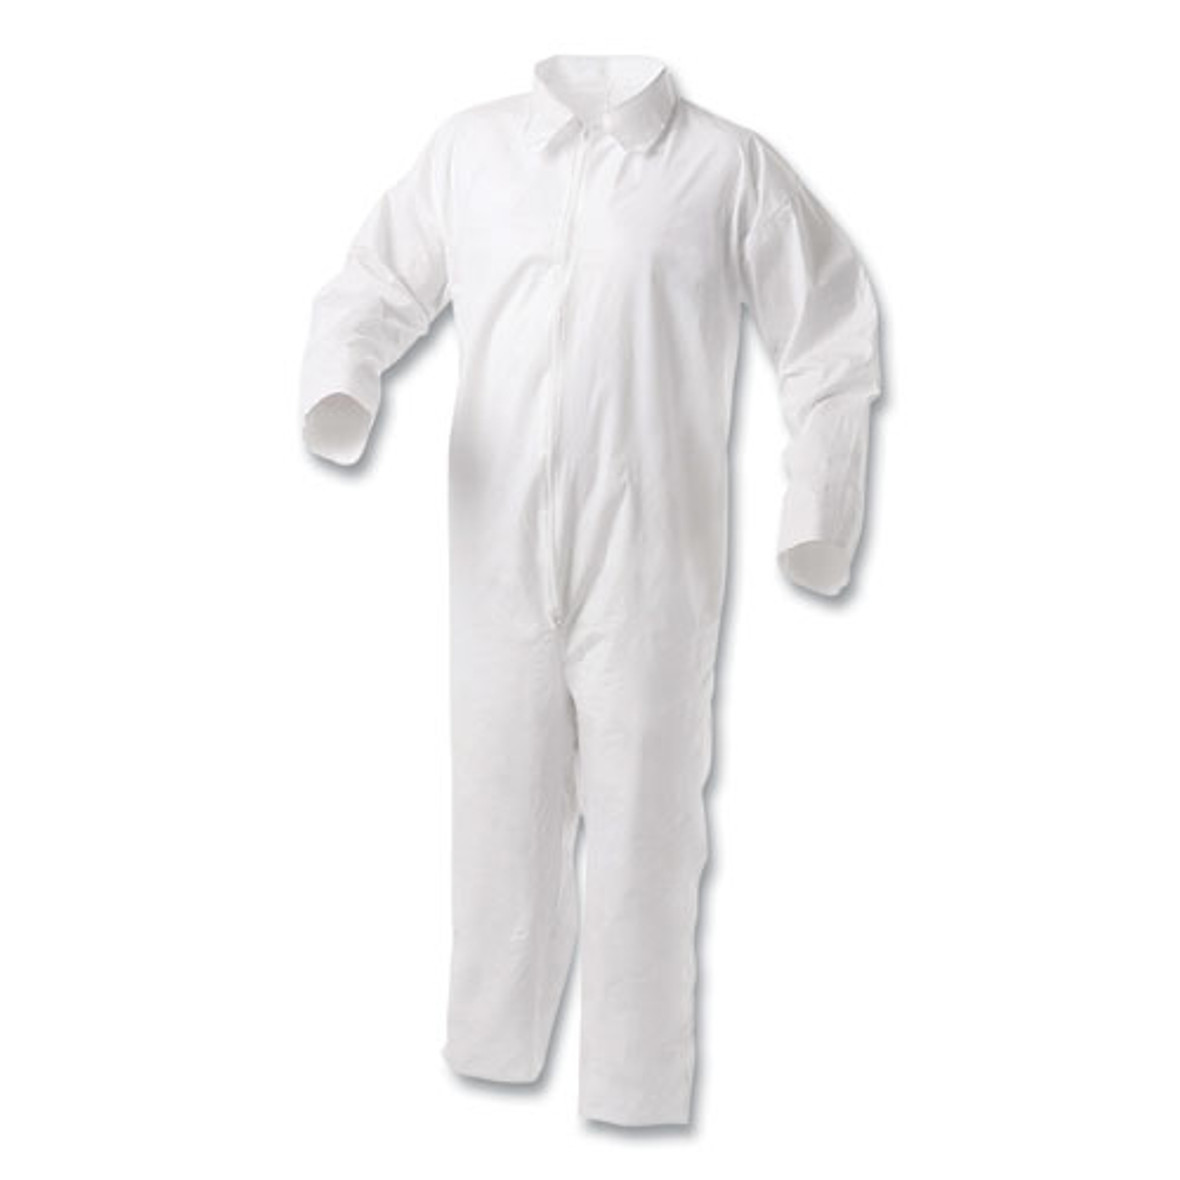 A35 Liquid And Particle Protection Coveralls, Zipper Front, 2x-large, White, 25/carton